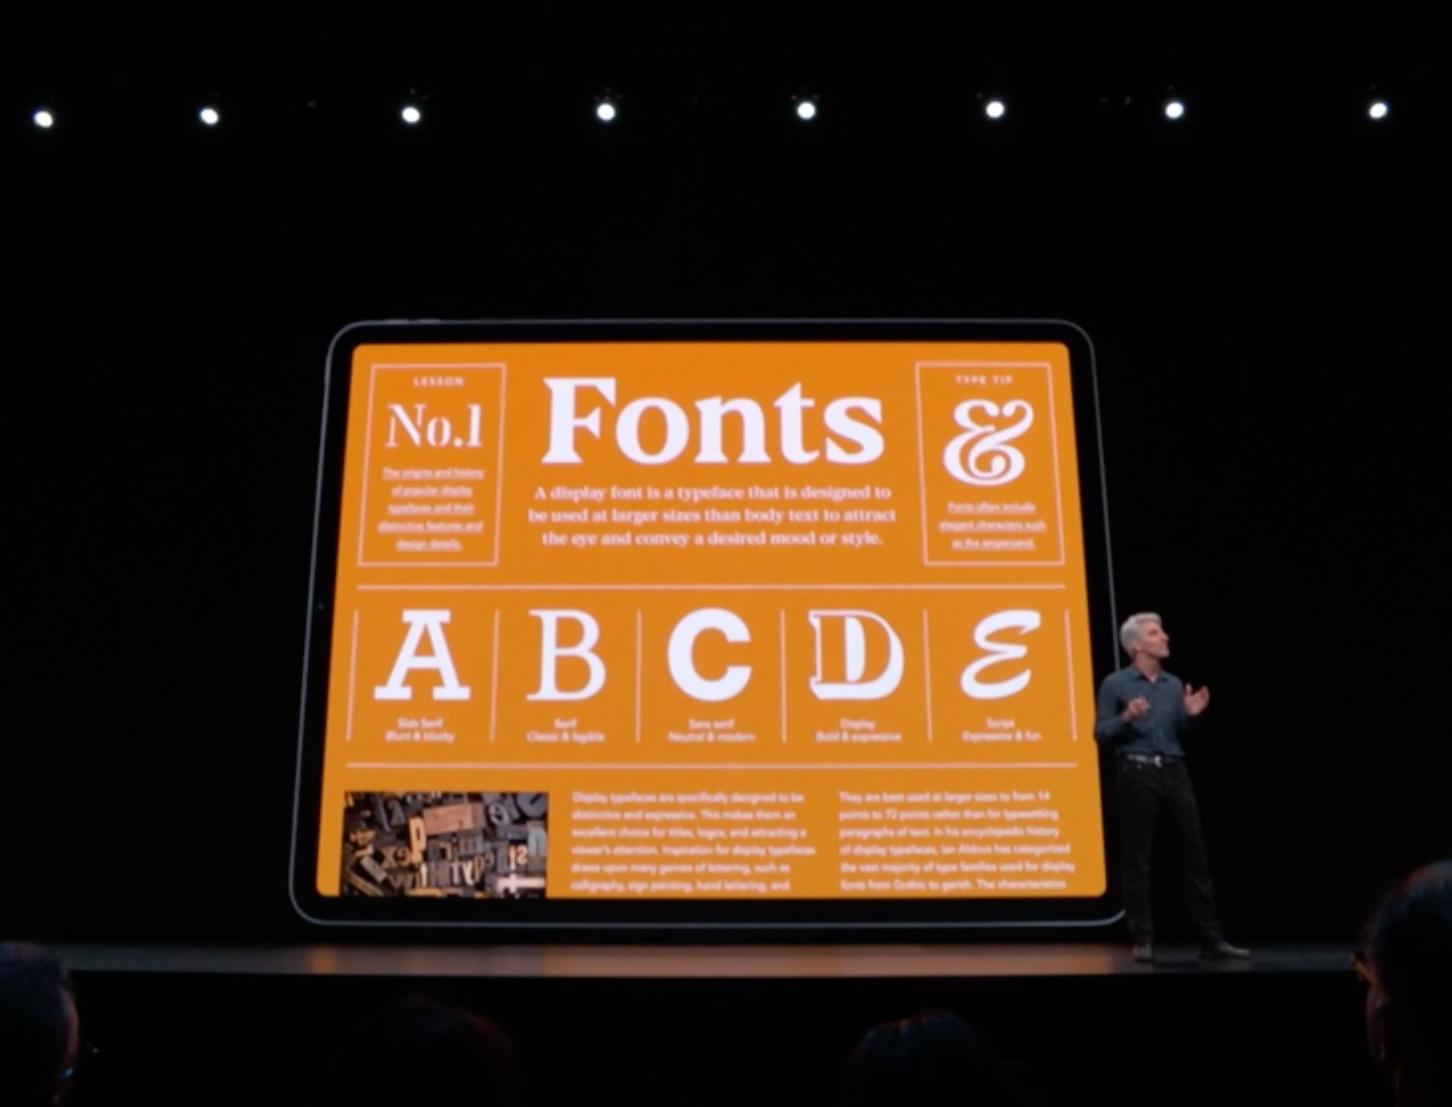 More information about "Custom font installation finally arrived with iOS 13 and iPad OS"